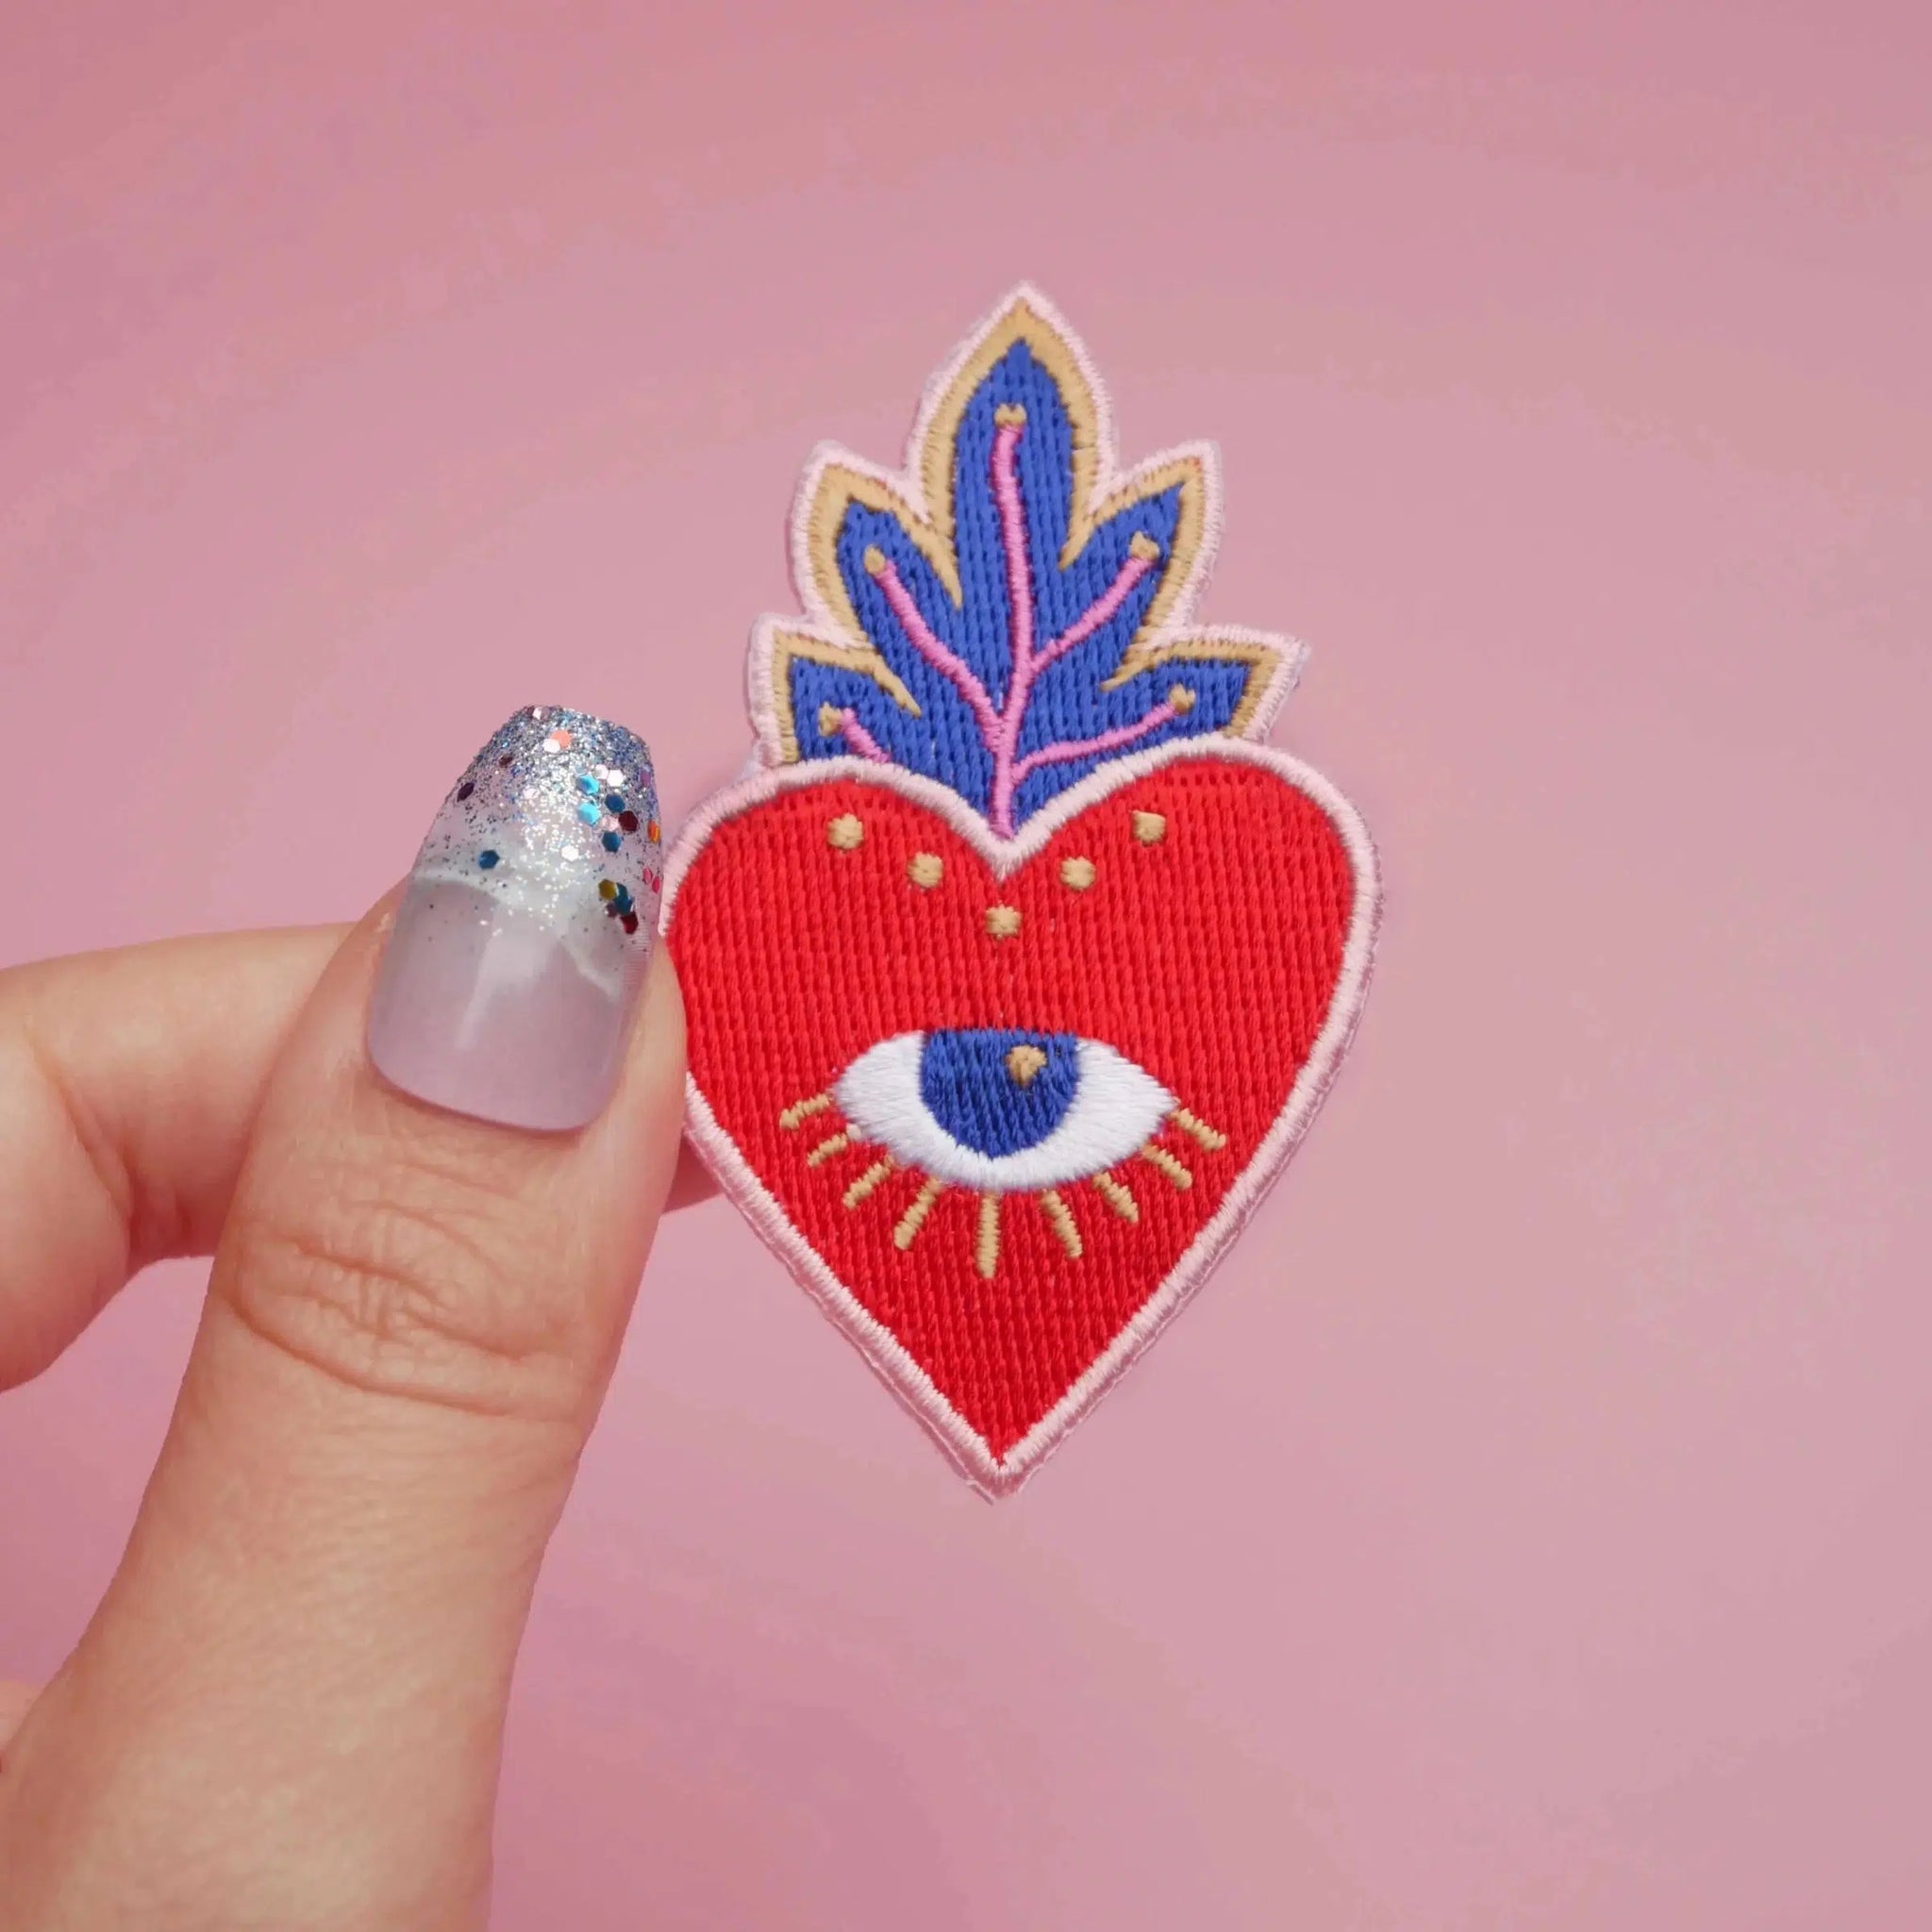 Malicieuse-Ex Voto Heart Iron-On Patch-accessory-gather here online